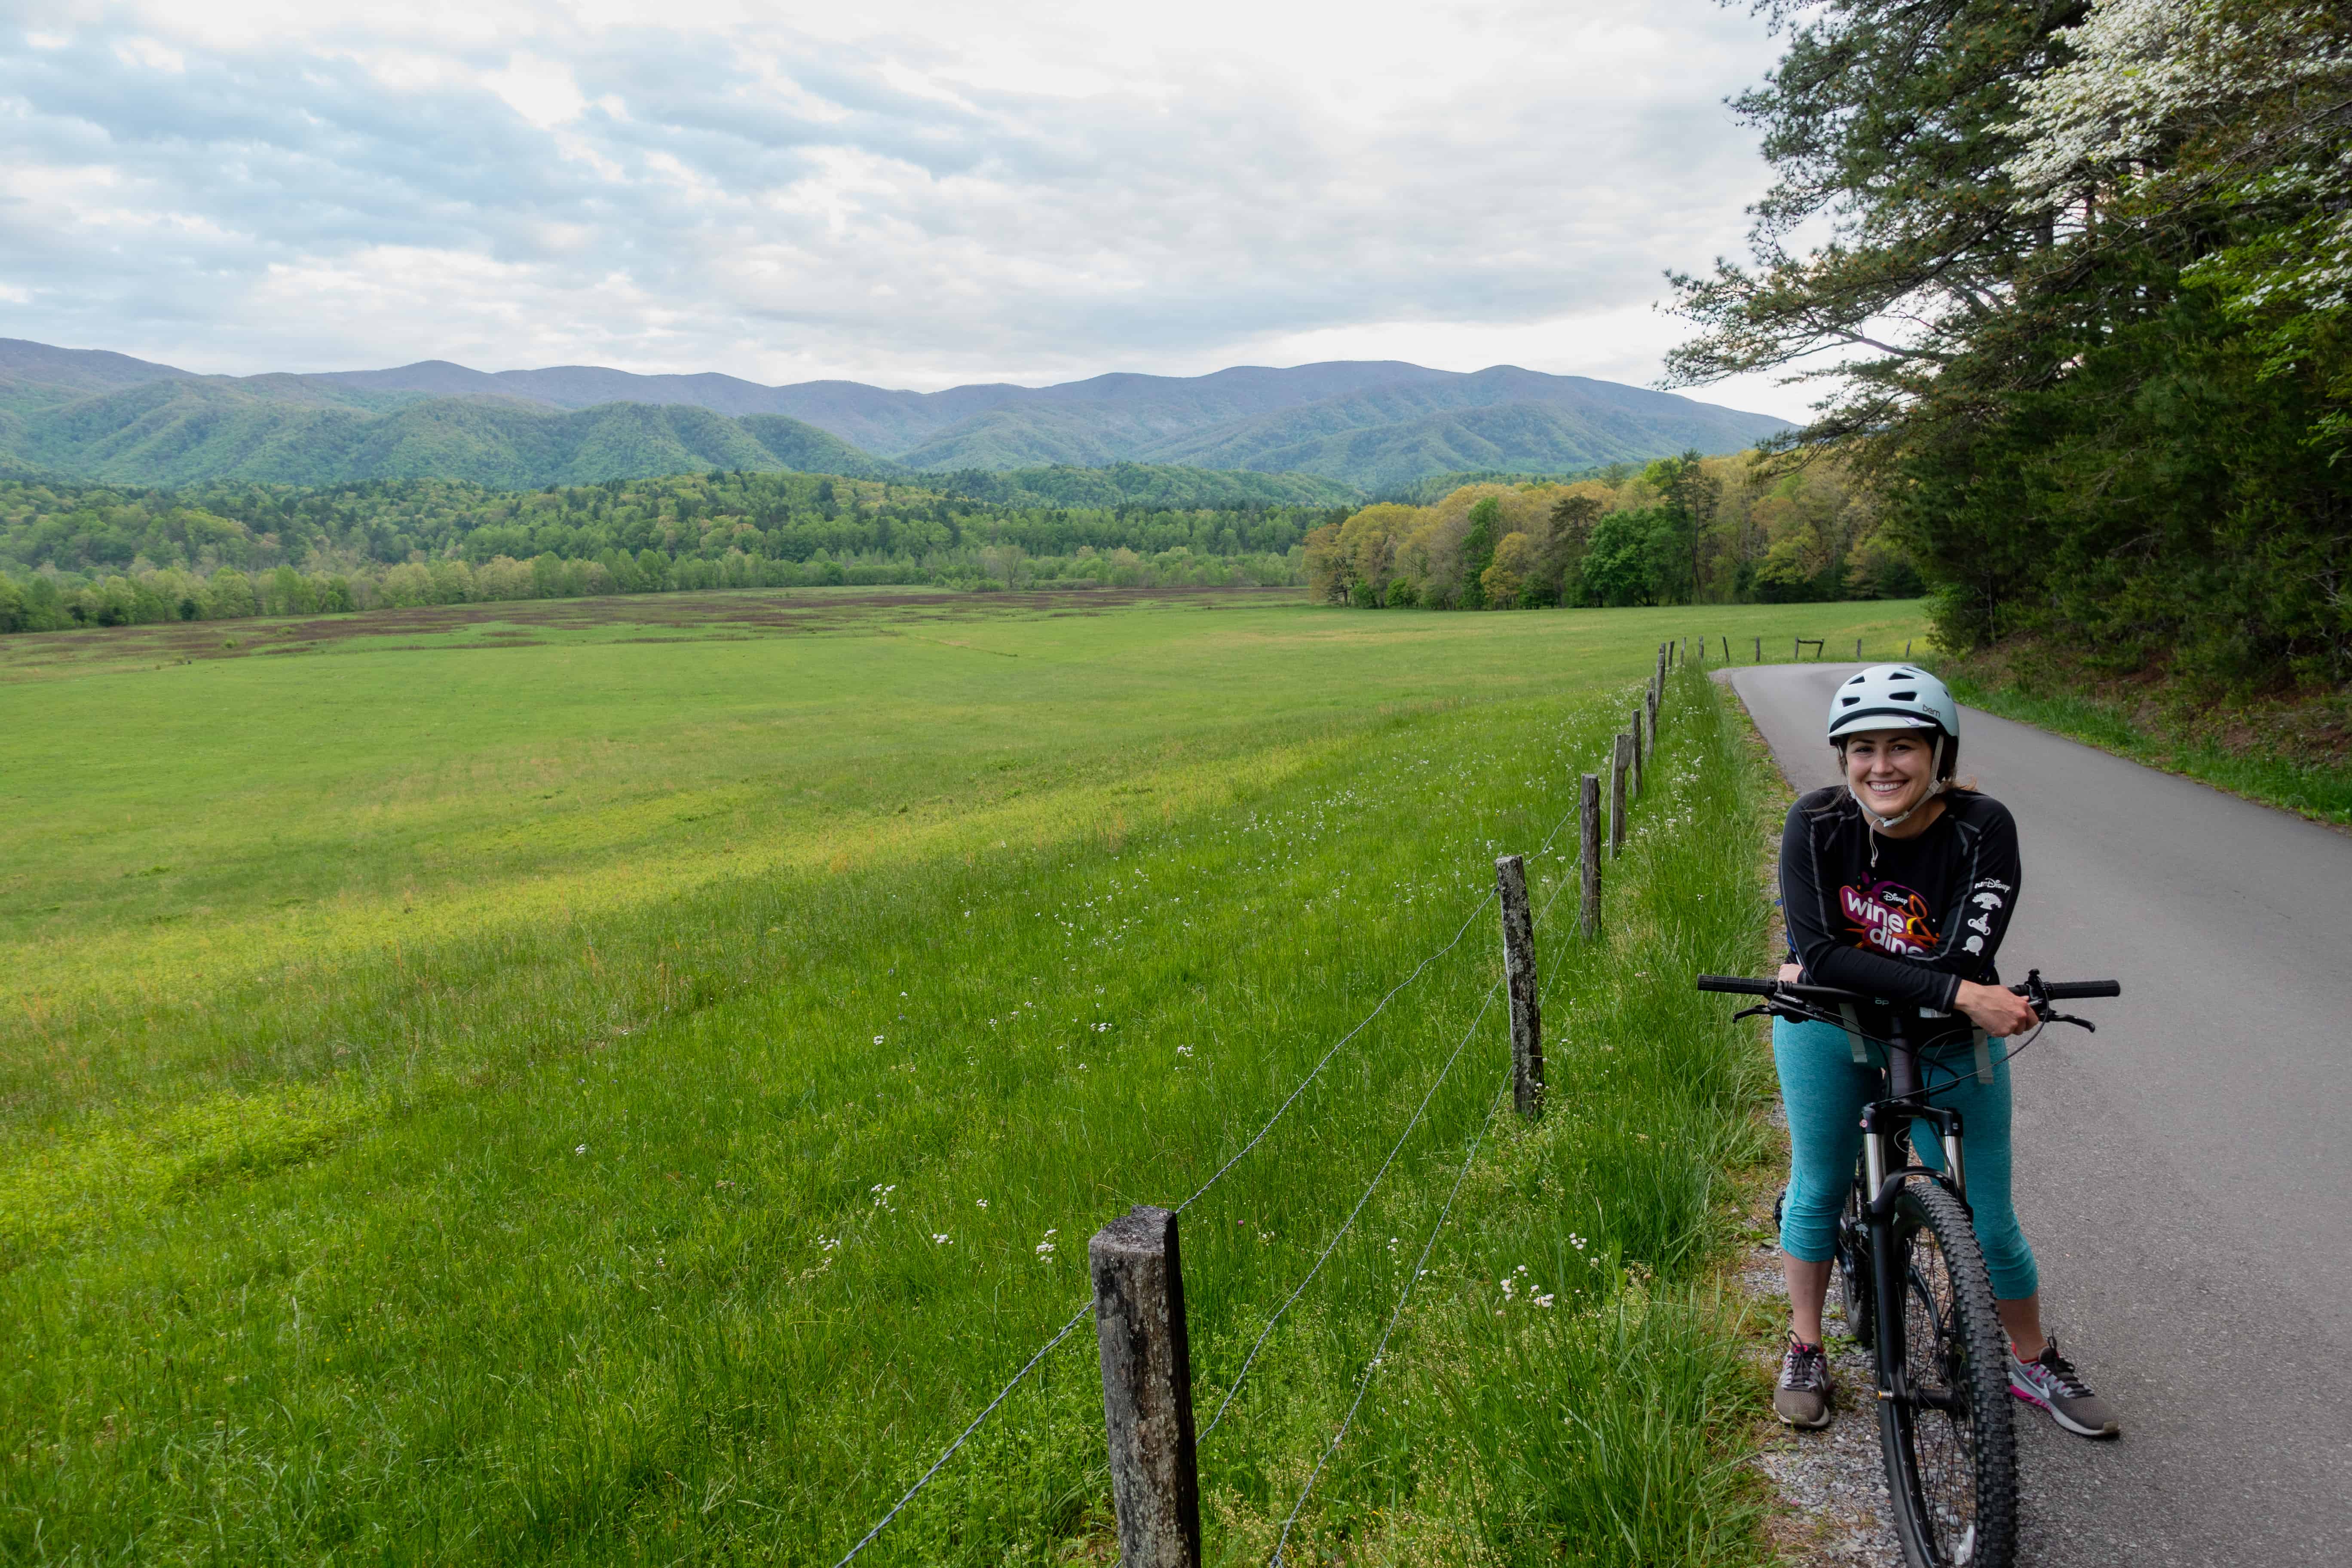 Cindy biking Cades Cove in Great Smoky Mountains National Park